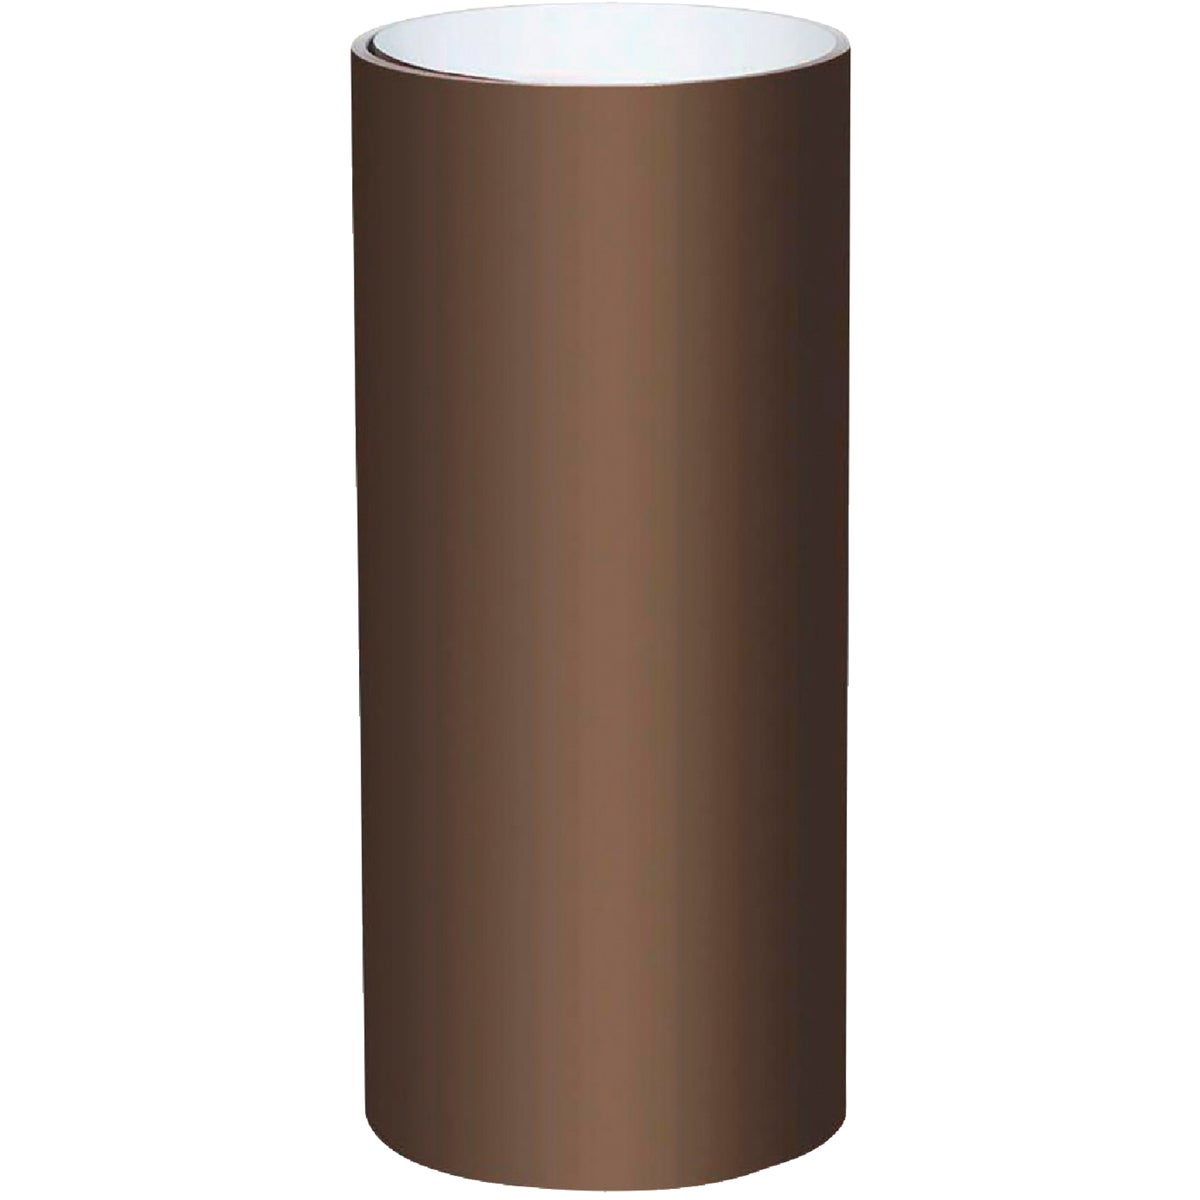 Spectra Metals RTC14B277W187 Spectra Metals 14 In. x 50 Ft. Musket Brown Painted Aluminum Trim Coil RTC14B277W187